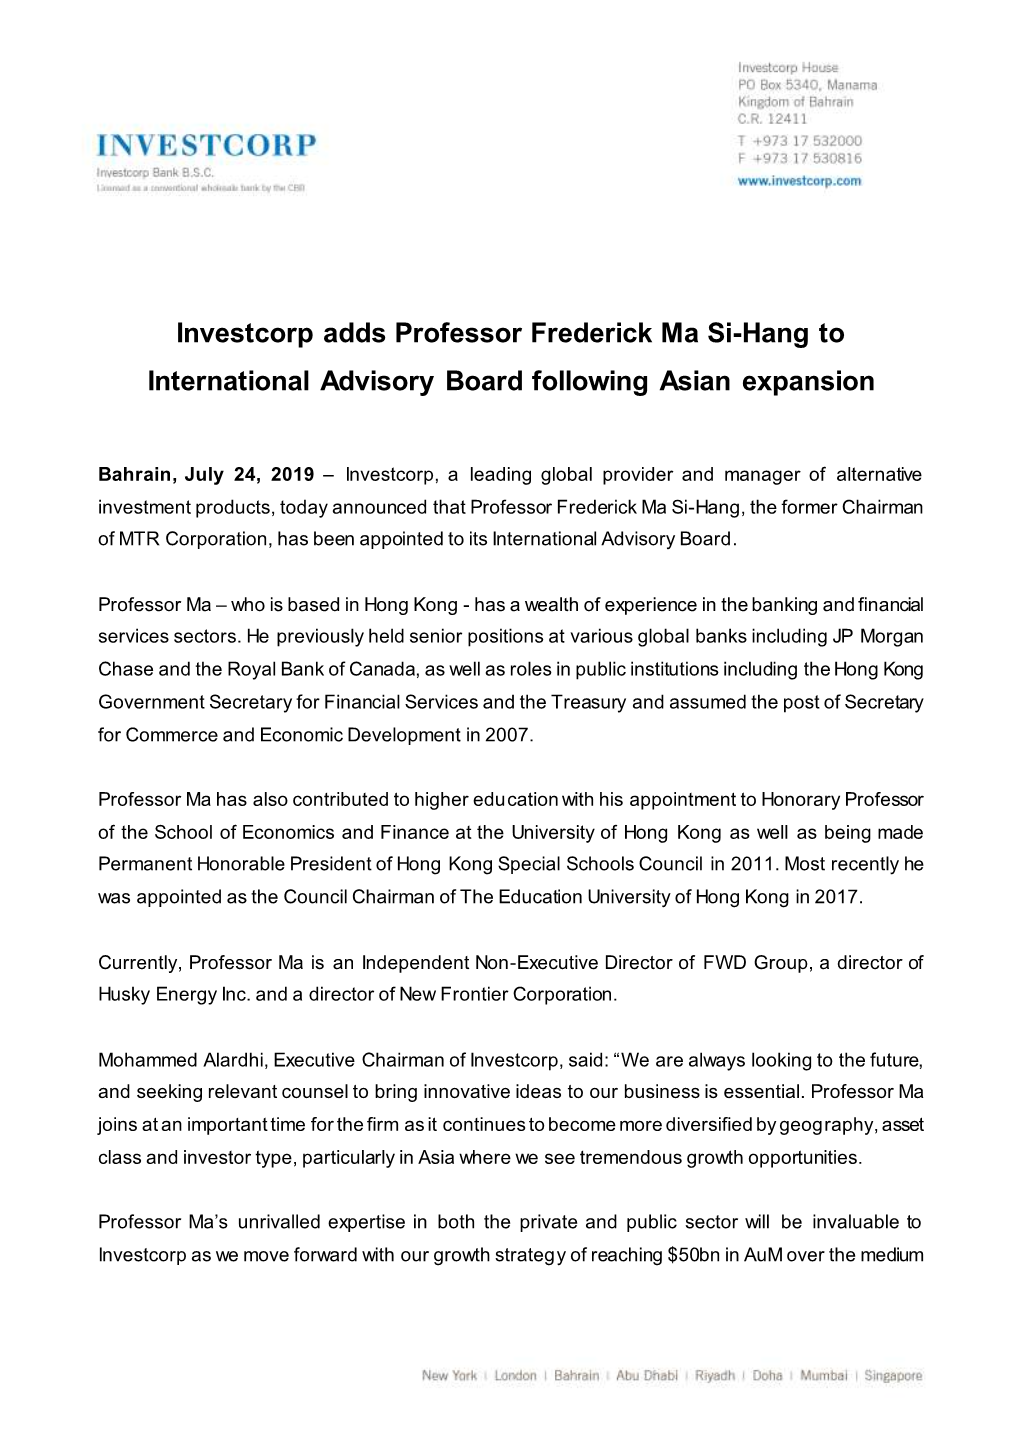 Investcorp Adds Professor Frederick Ma Si-Hang to International Advisory Board Following Asian Expansion